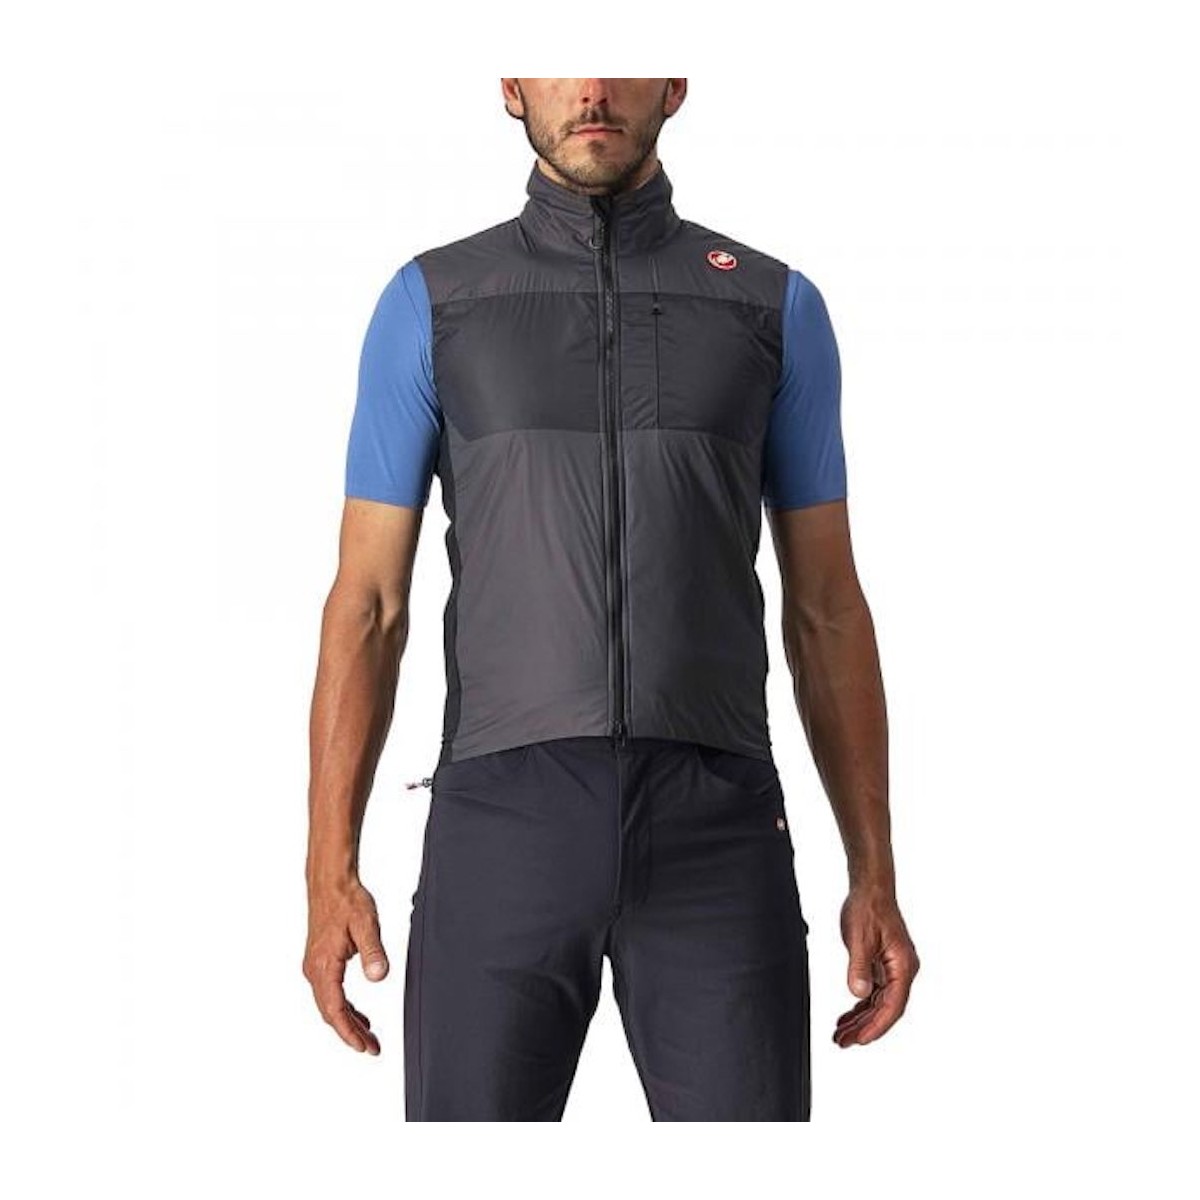 CASTELLI UNLIMITED PUFFY cycling vest - black